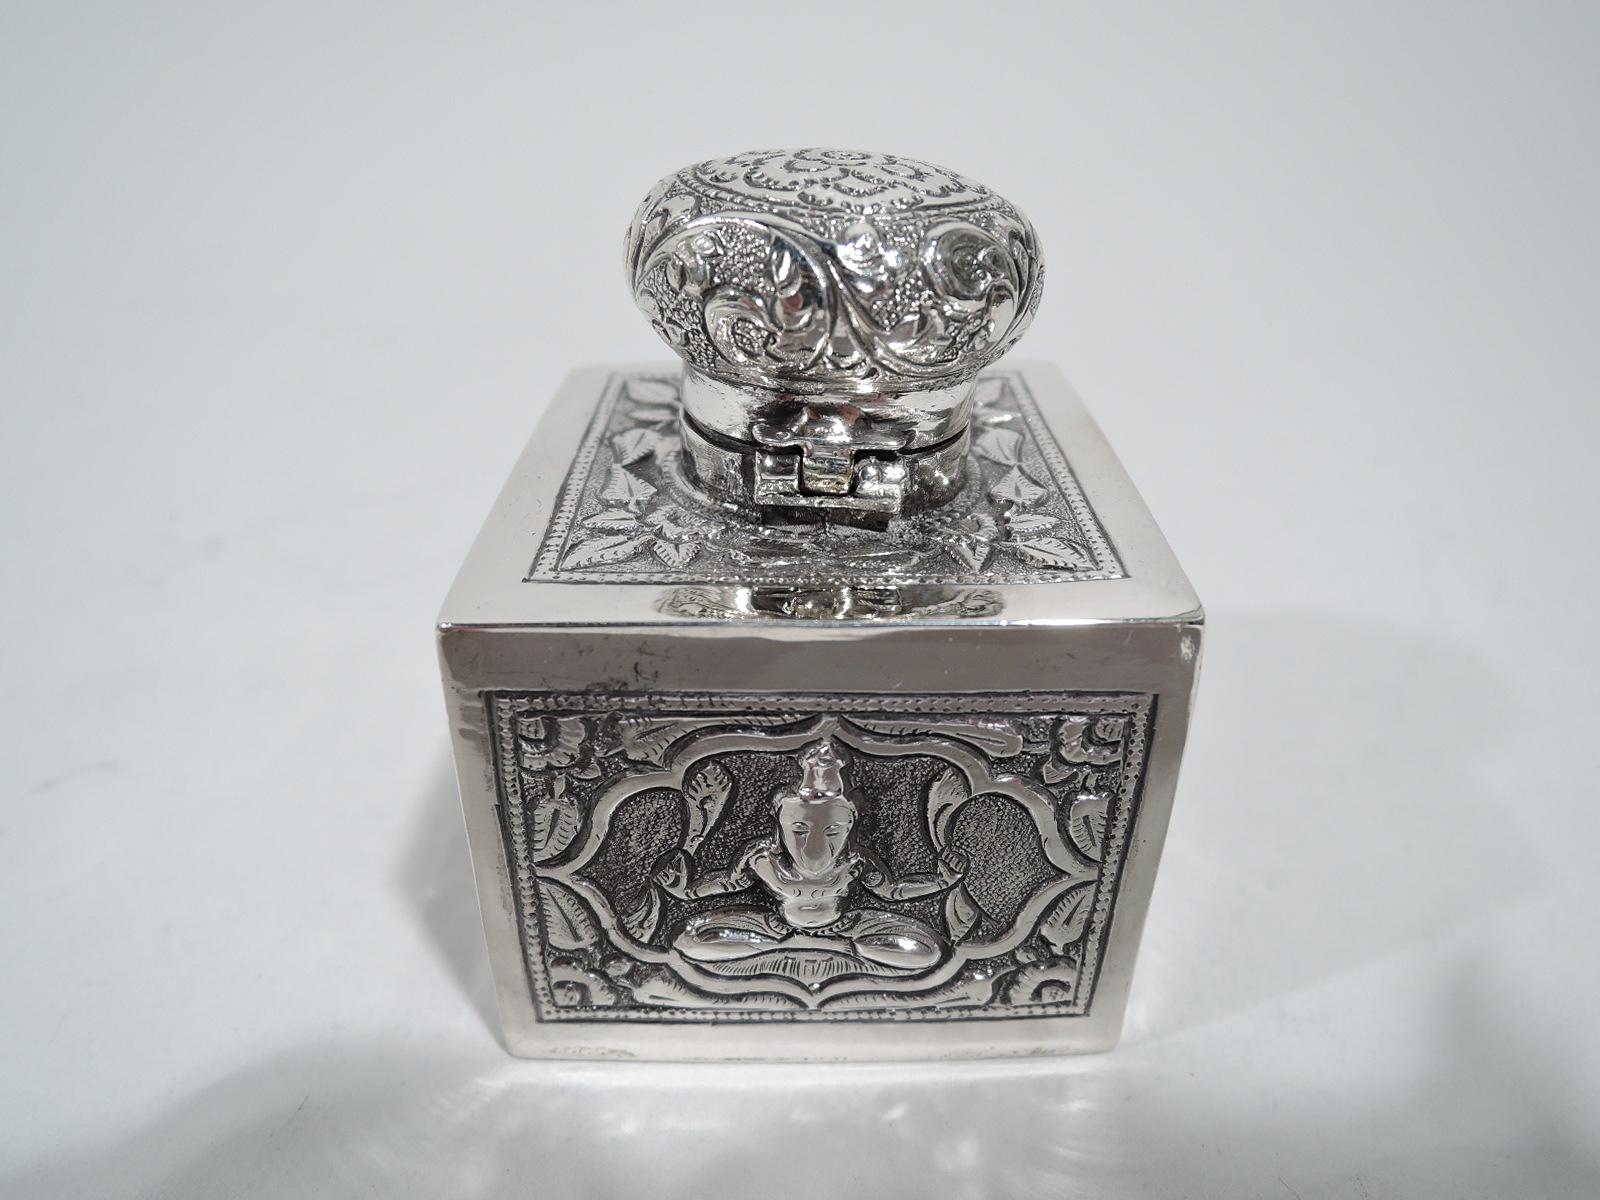 Siamese silver inkwell, circa 1920. Cubic with cross-legged yogi and dancing contortionists in mandala frames. Cover hinged with tooled and repousse scrolls and flowers. Unmarked. Weight: 2.4 troy ounces.